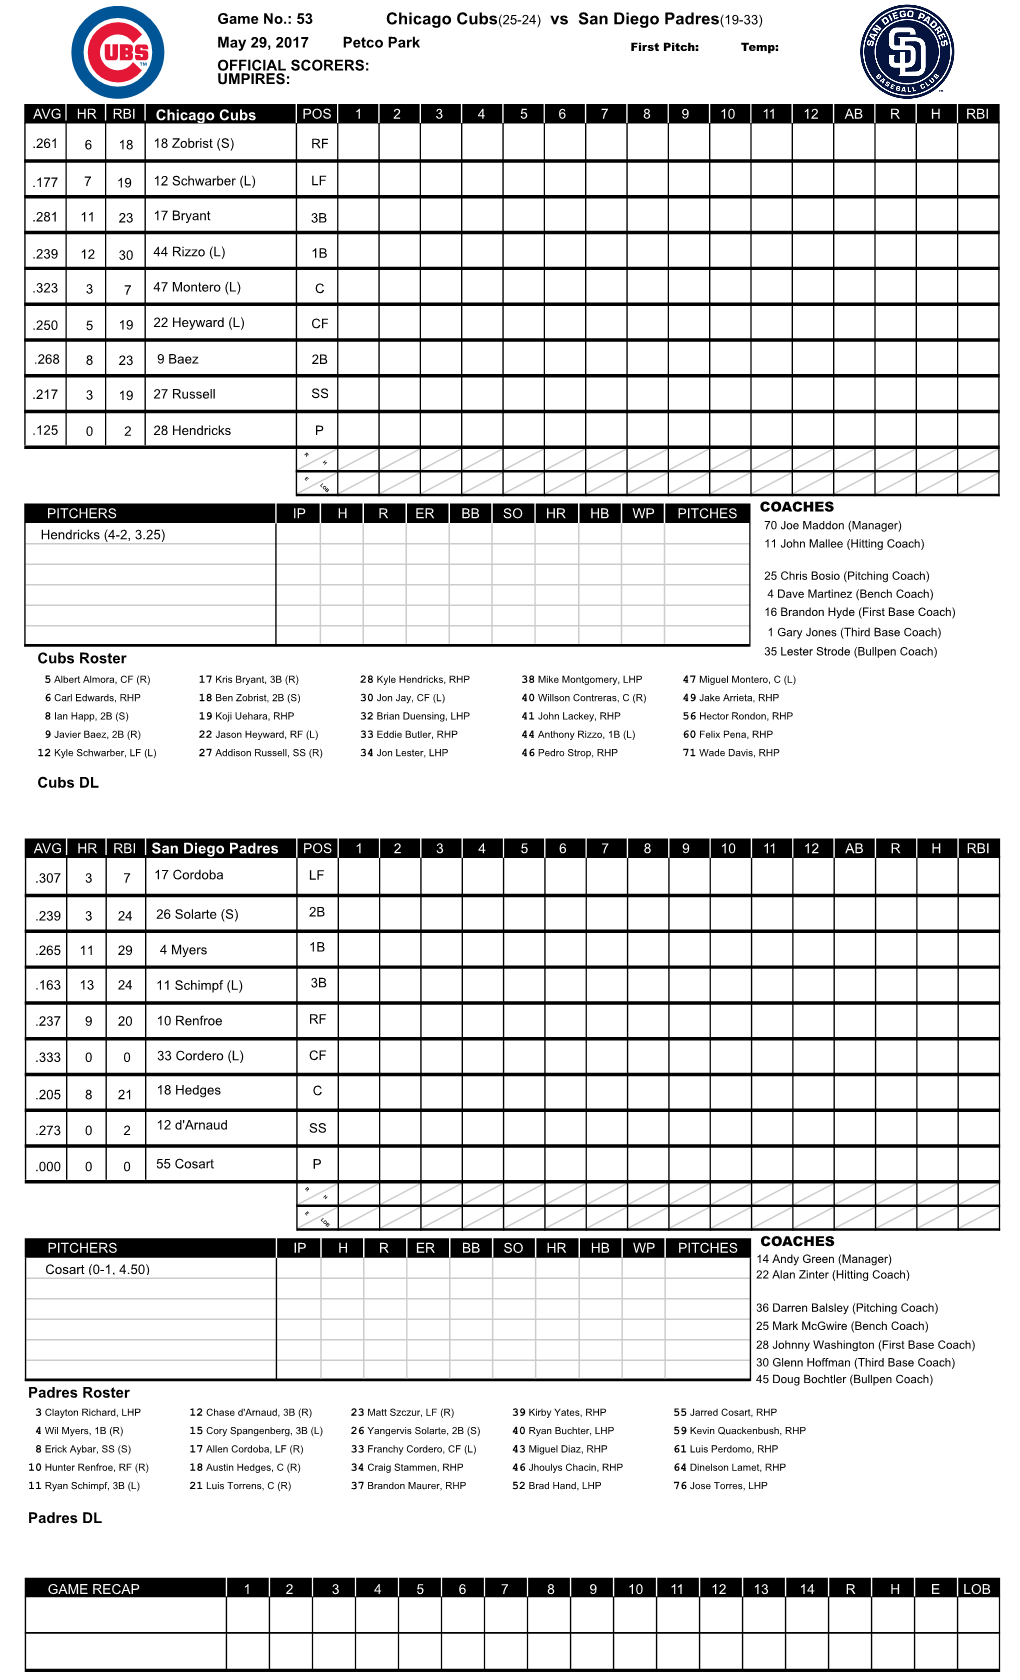 Chicago Cubs(25-24) Vs San Diego Padres(19-33)